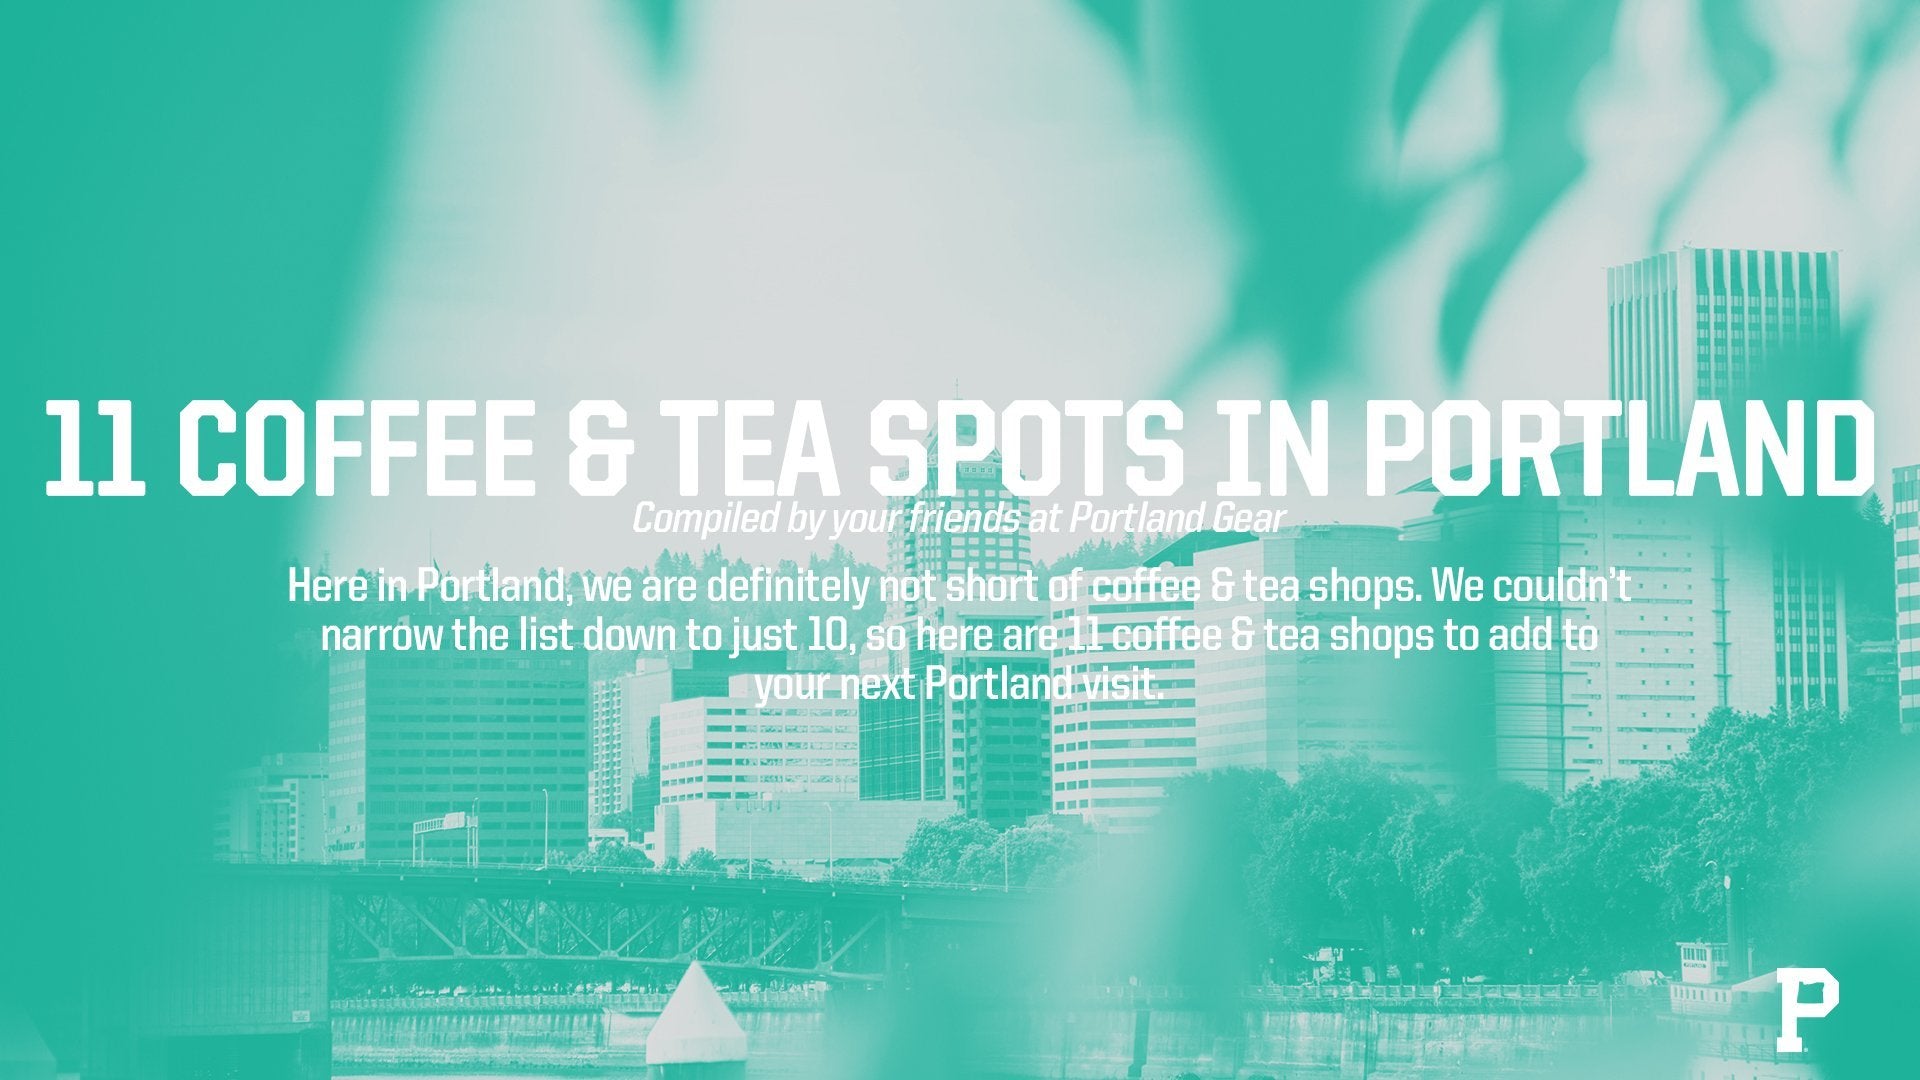 11 Coffee & Tea Spots in Portland to check out this season. - Portland Gear